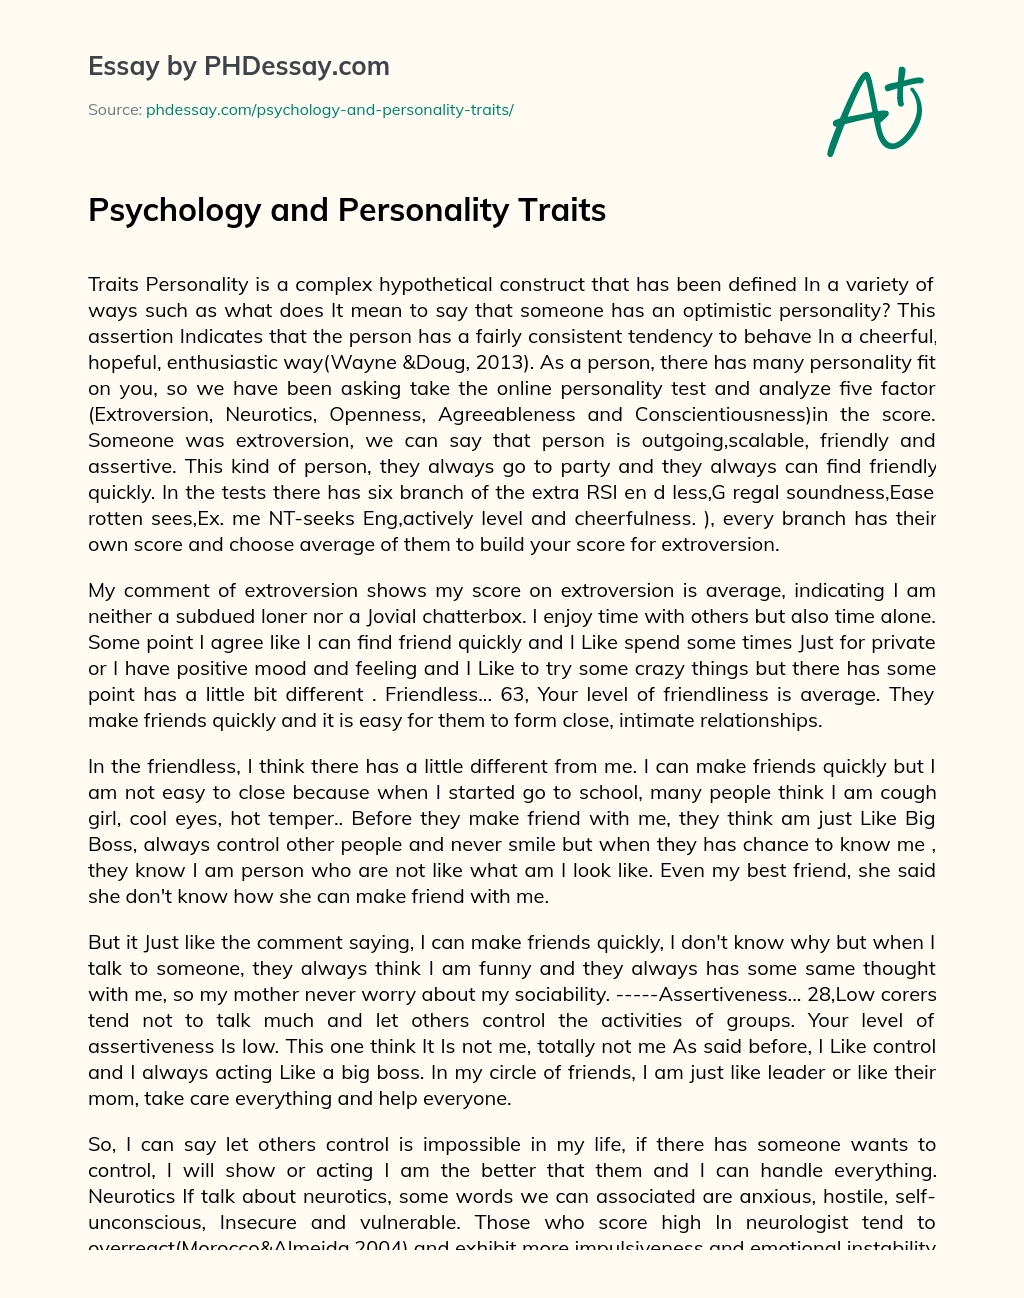 Psychology and Personality Traits essay